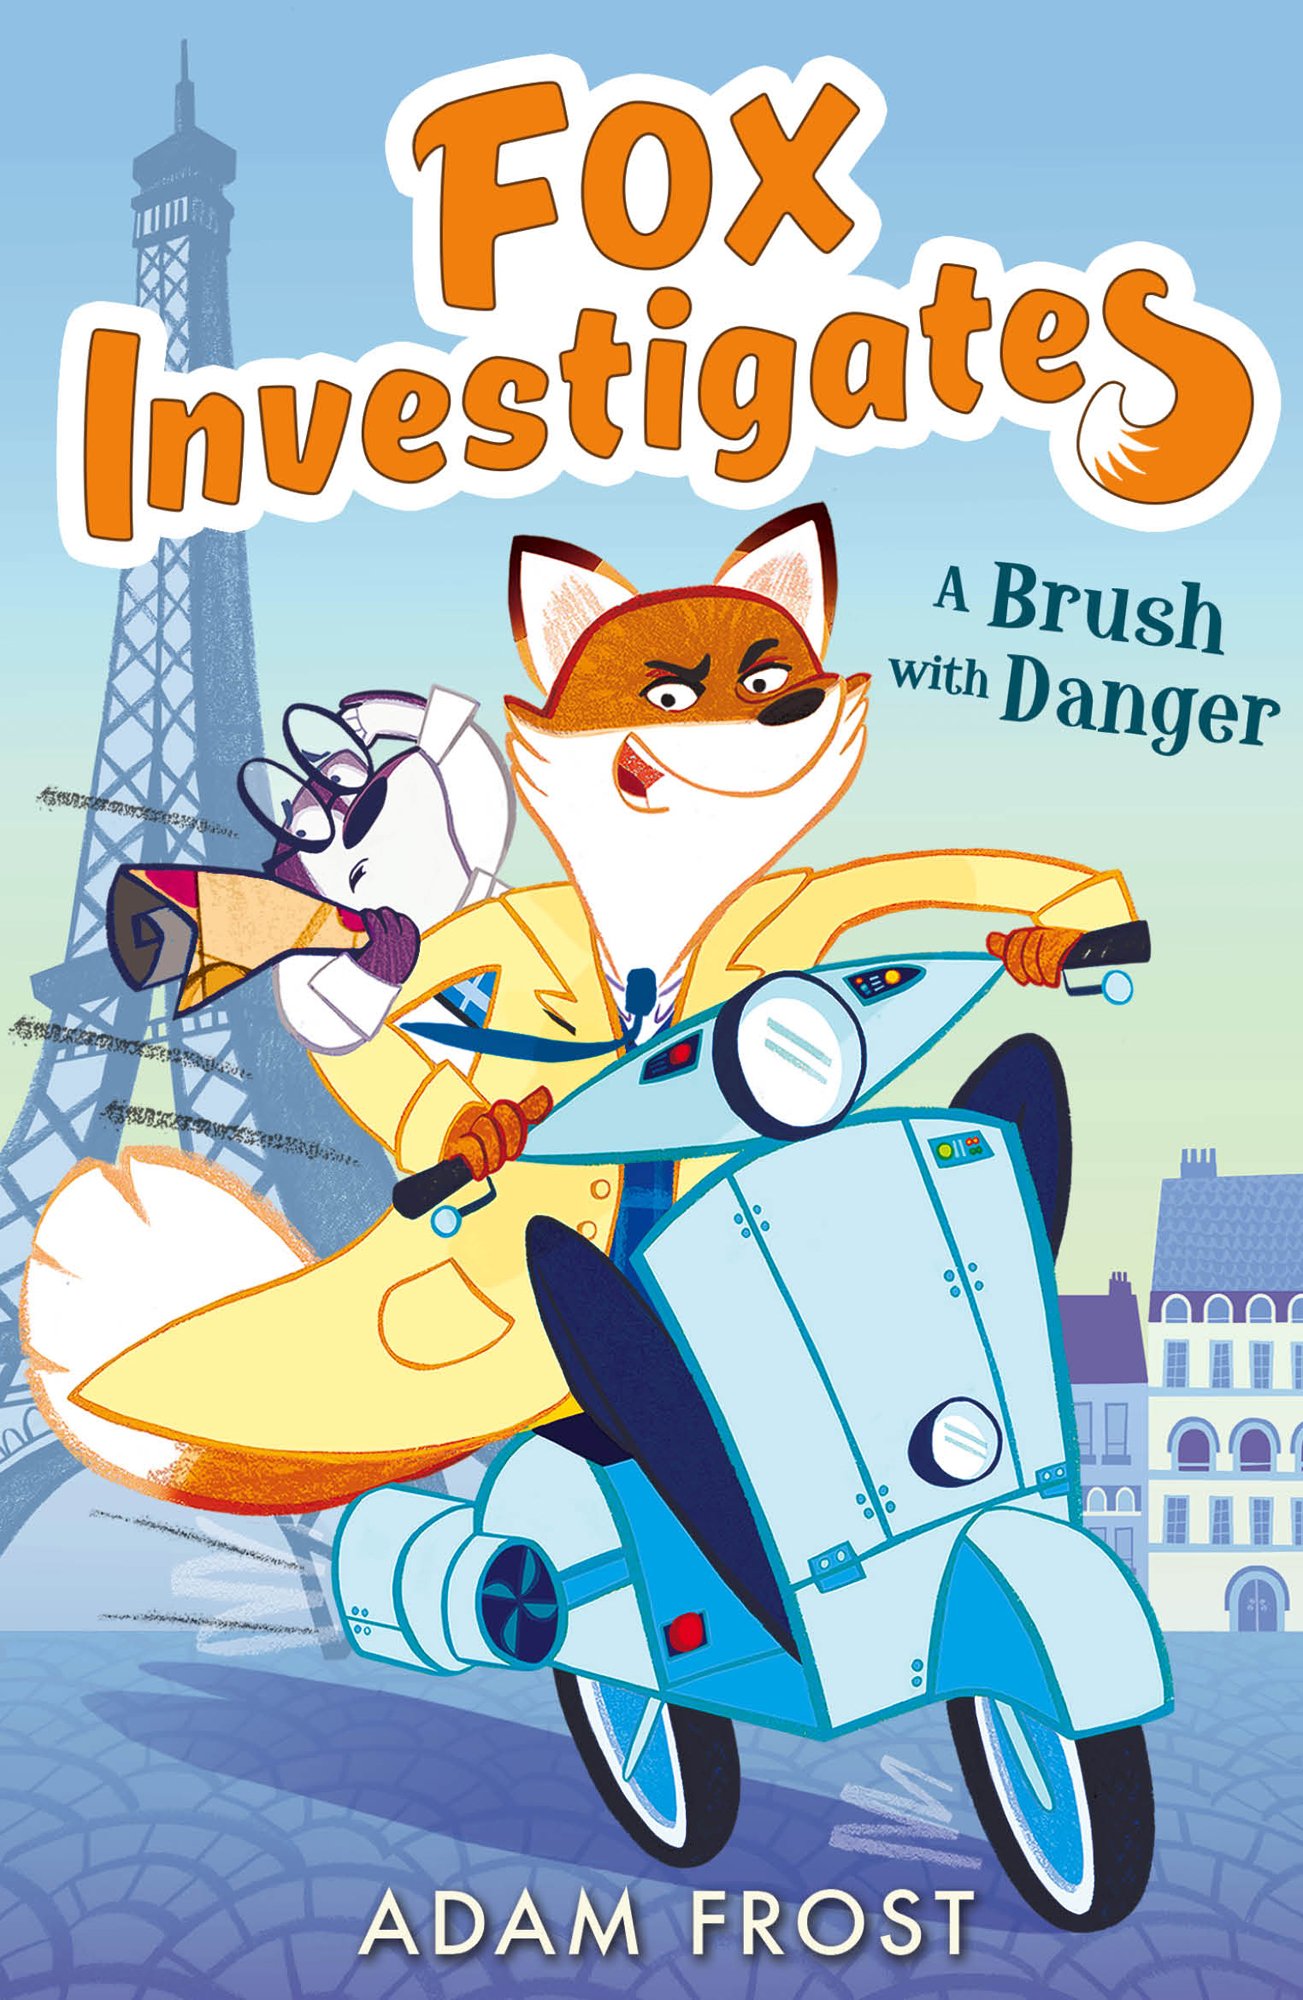 Fox Investigates: A Brush with Danger by Adam Frost